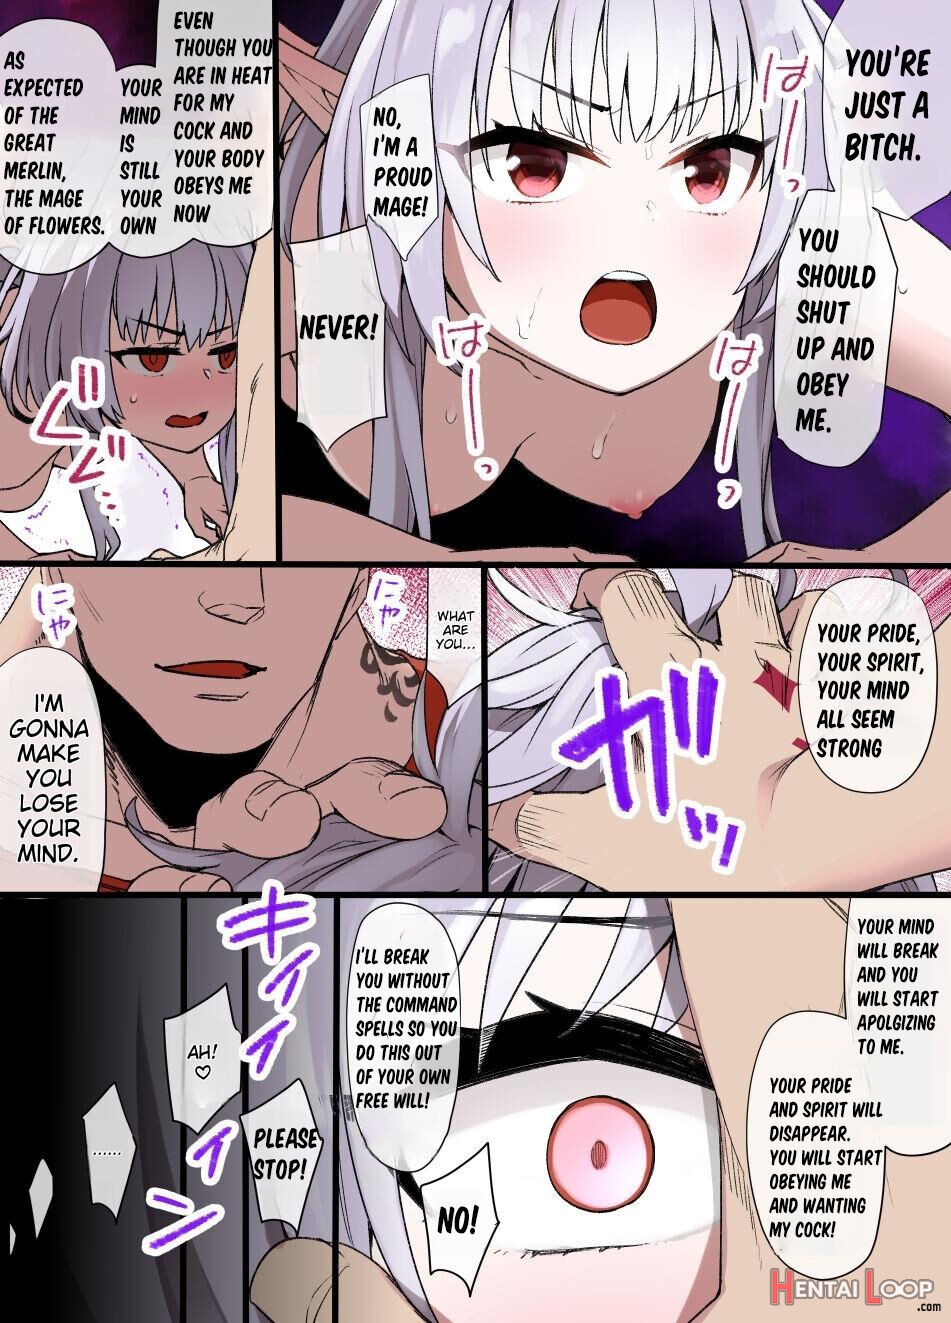 Fgo Enslavement Of Mage Of Flowers page 4